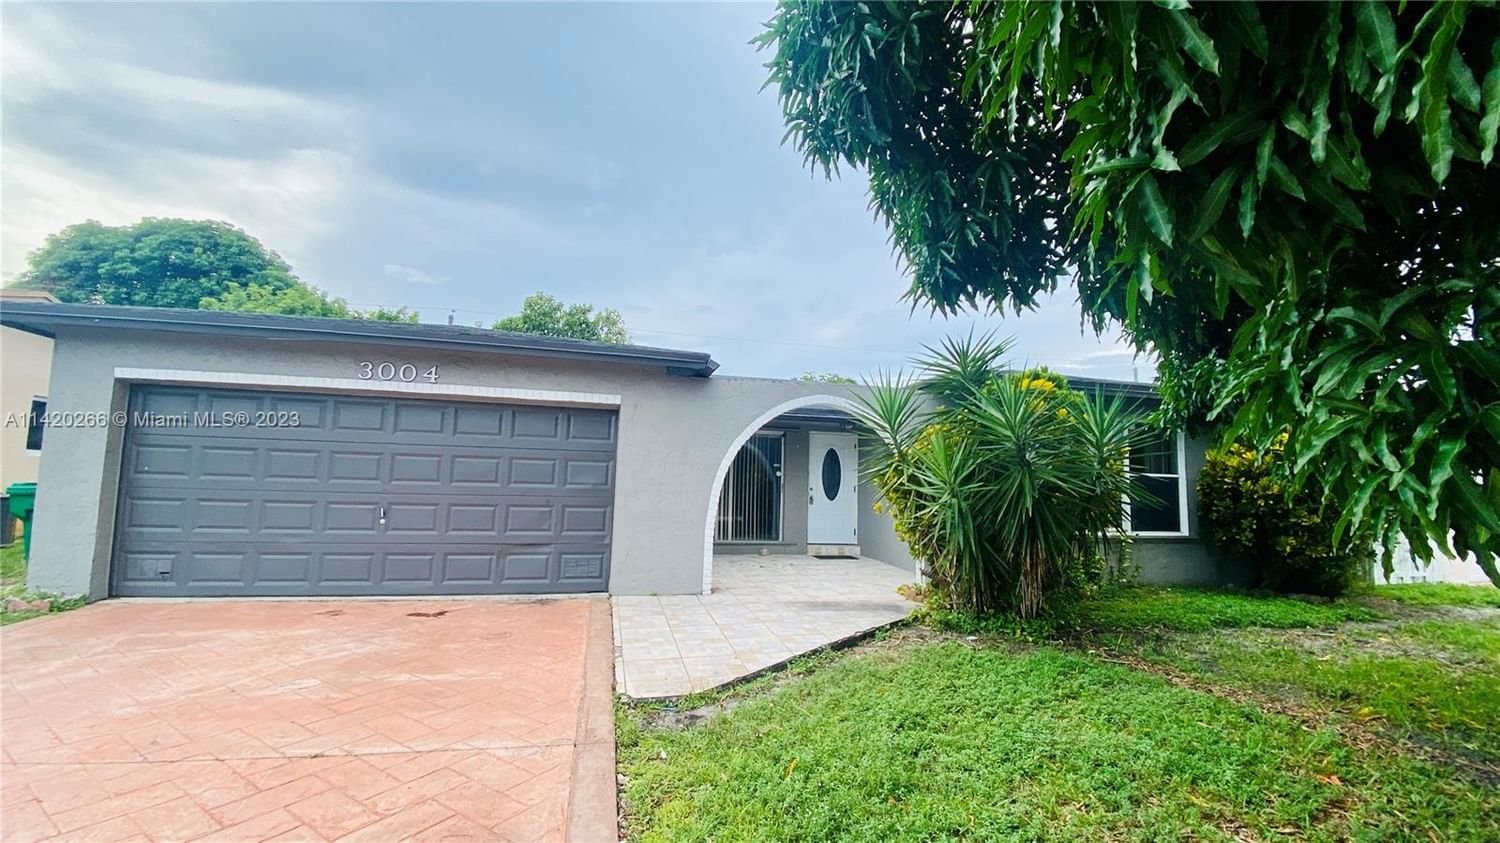 Real estate property located at 3004 Dolphin Dr, Broward County, Miramar, FL